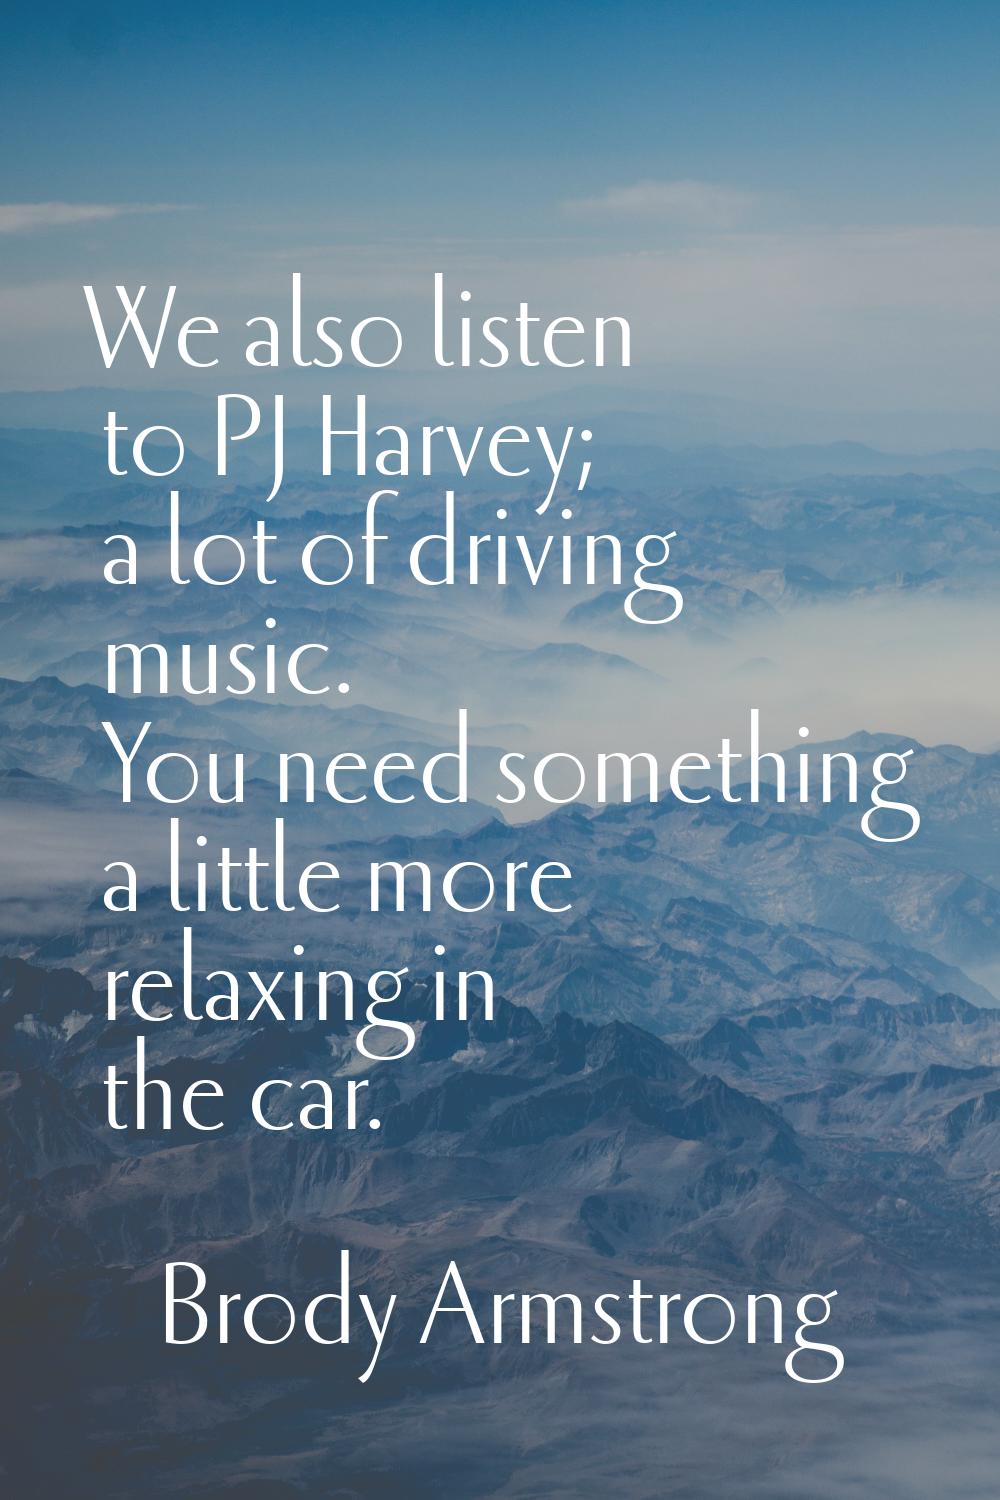 We also listen to PJ Harvey; a lot of driving music. You need something a little more relaxing in t